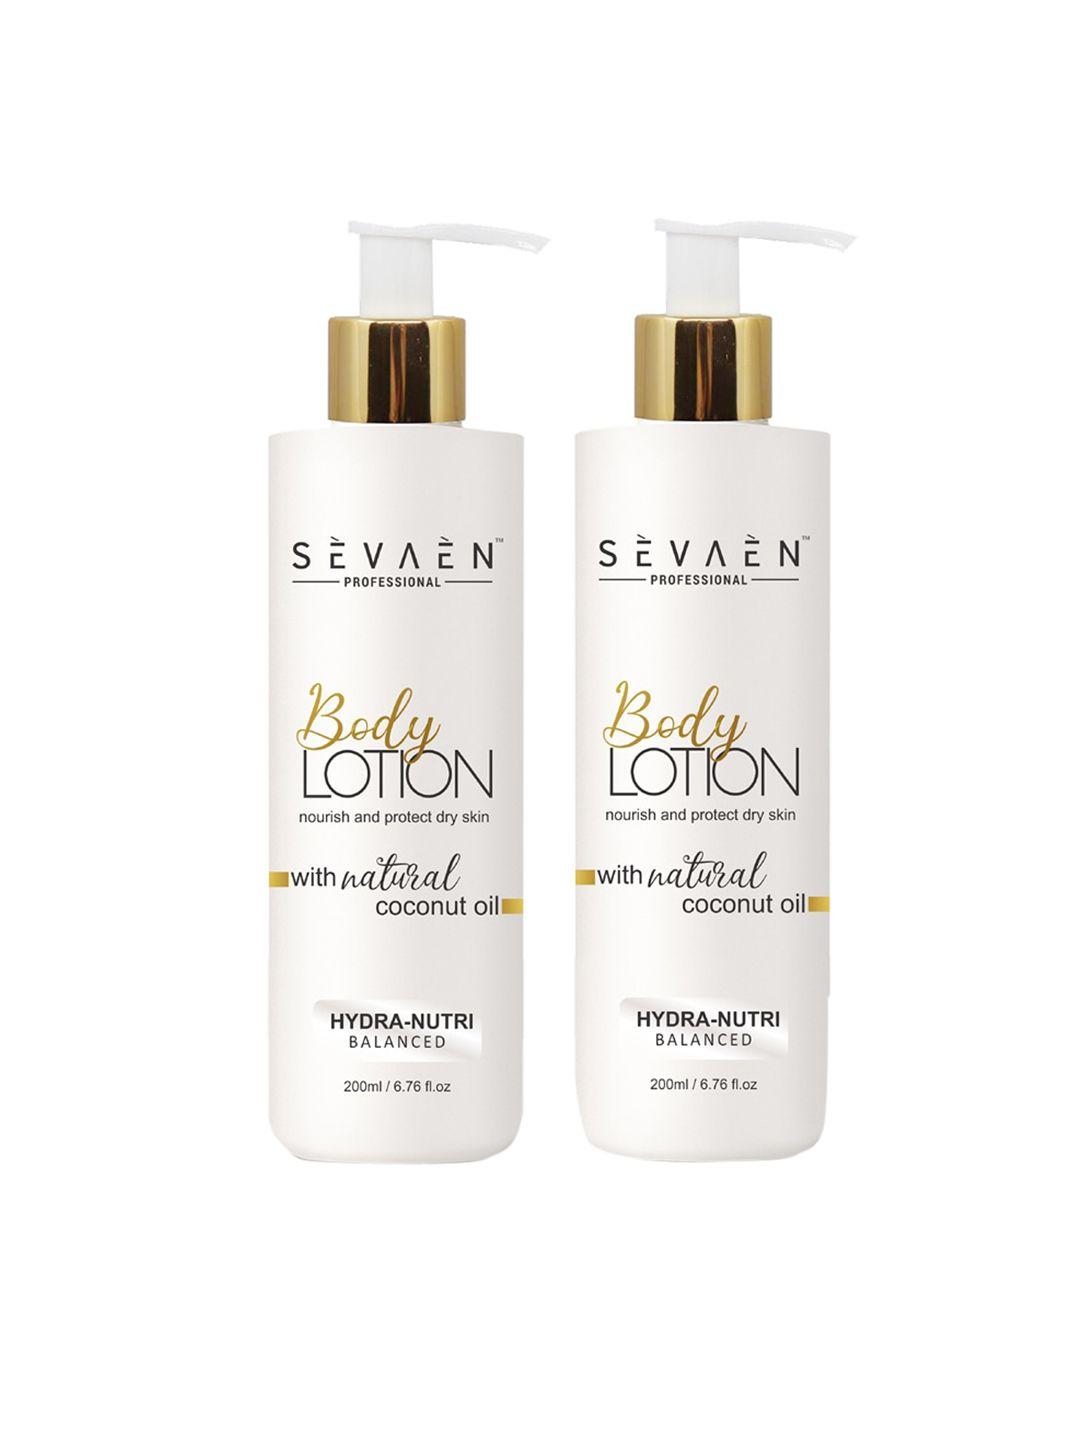 sevaen set of 2 moisture body lotions for dry skin with coconut oil - 200ml each